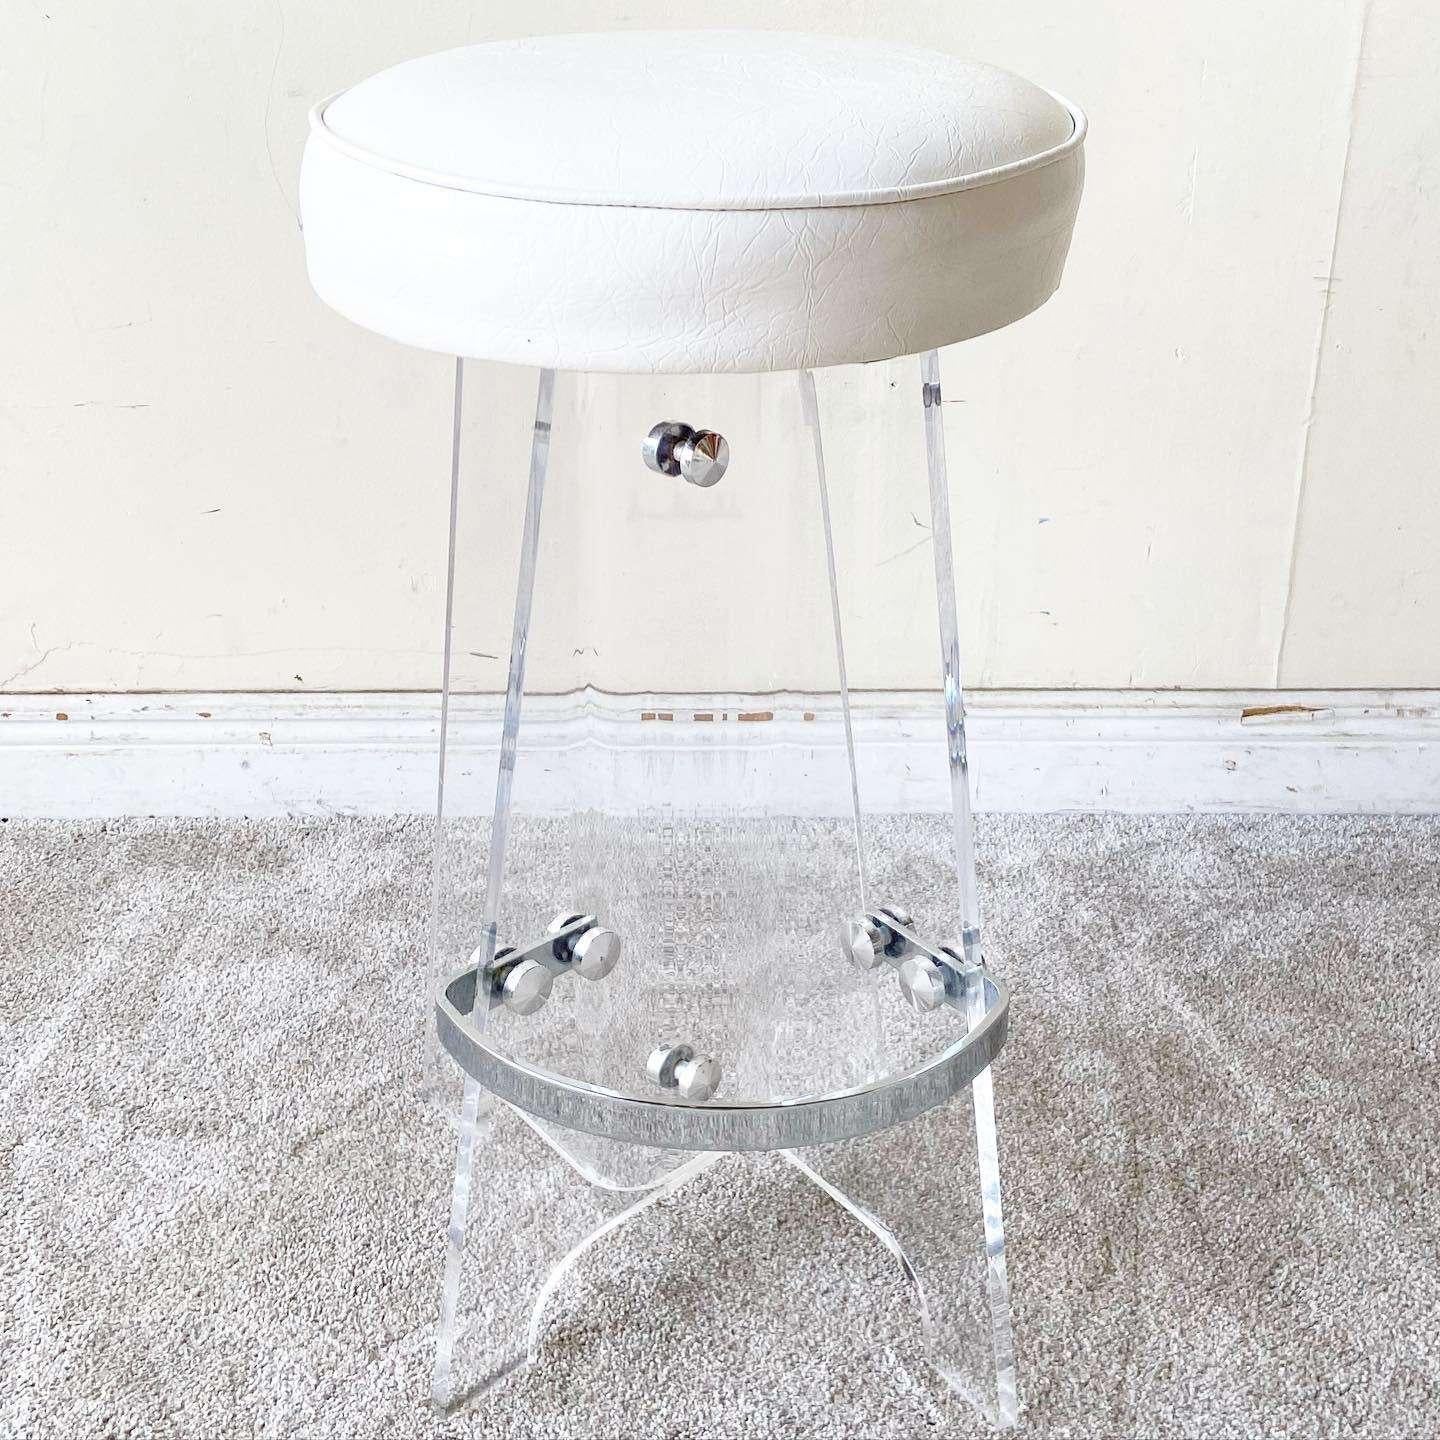 This refined Mid-Century Modern bar stool was made in the United States circa 1970. Features a sculptural scalloped base in translucent lucite with a demilune chrome support.